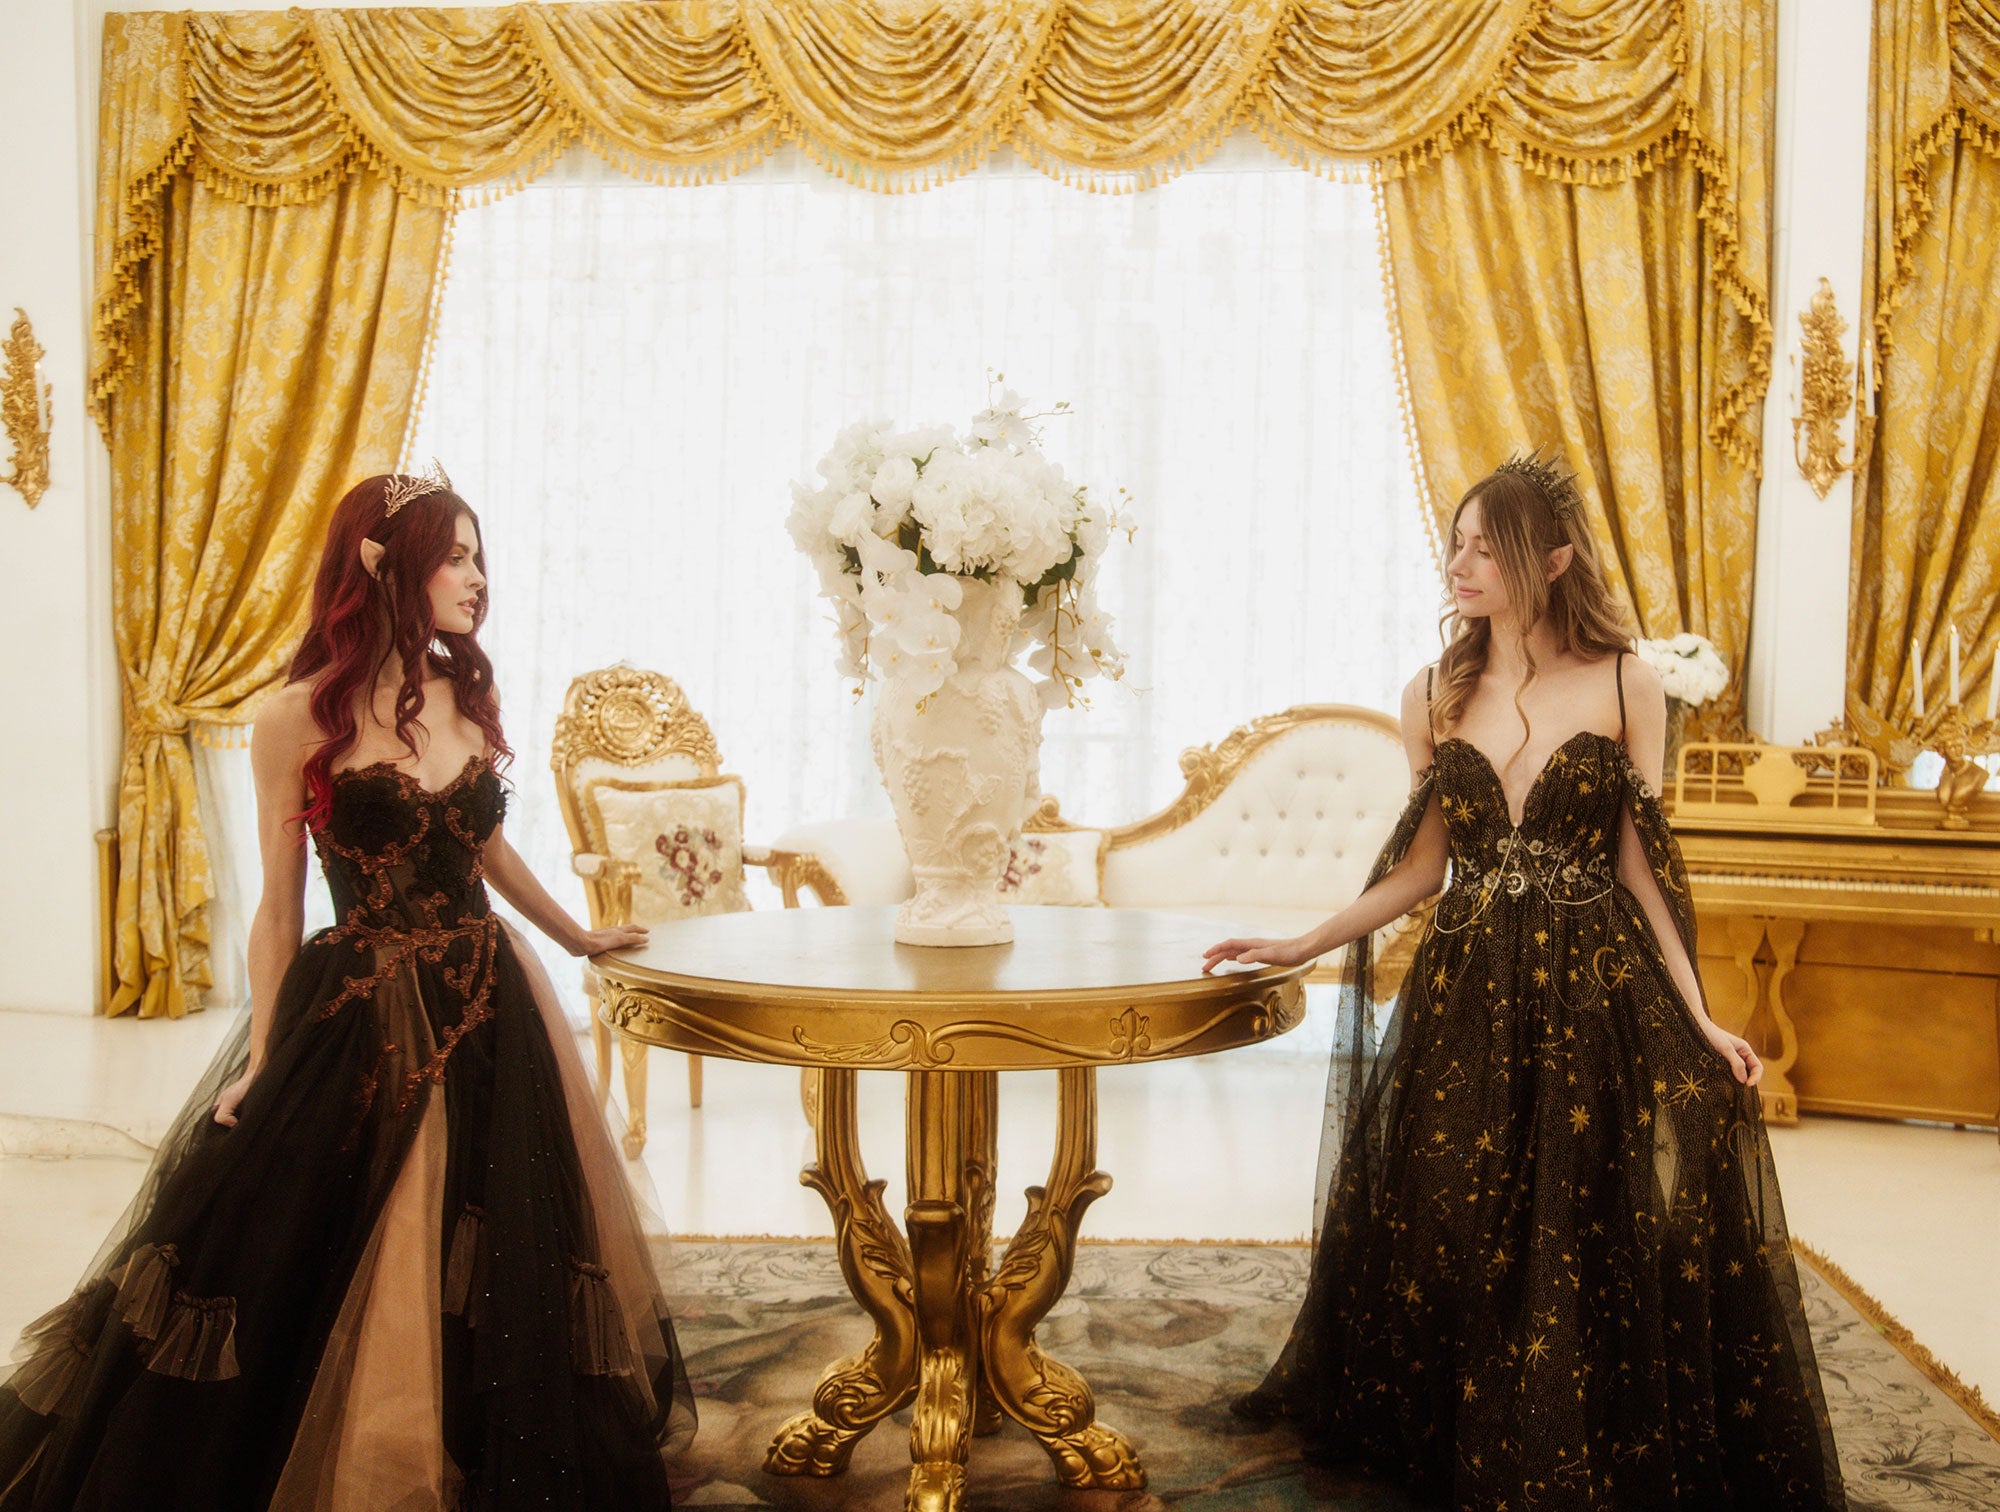 Two fae princesses in ornate black celestial themed gowns walk around a table in a golden palace and talk about The Paravelle Ball fantasy event.